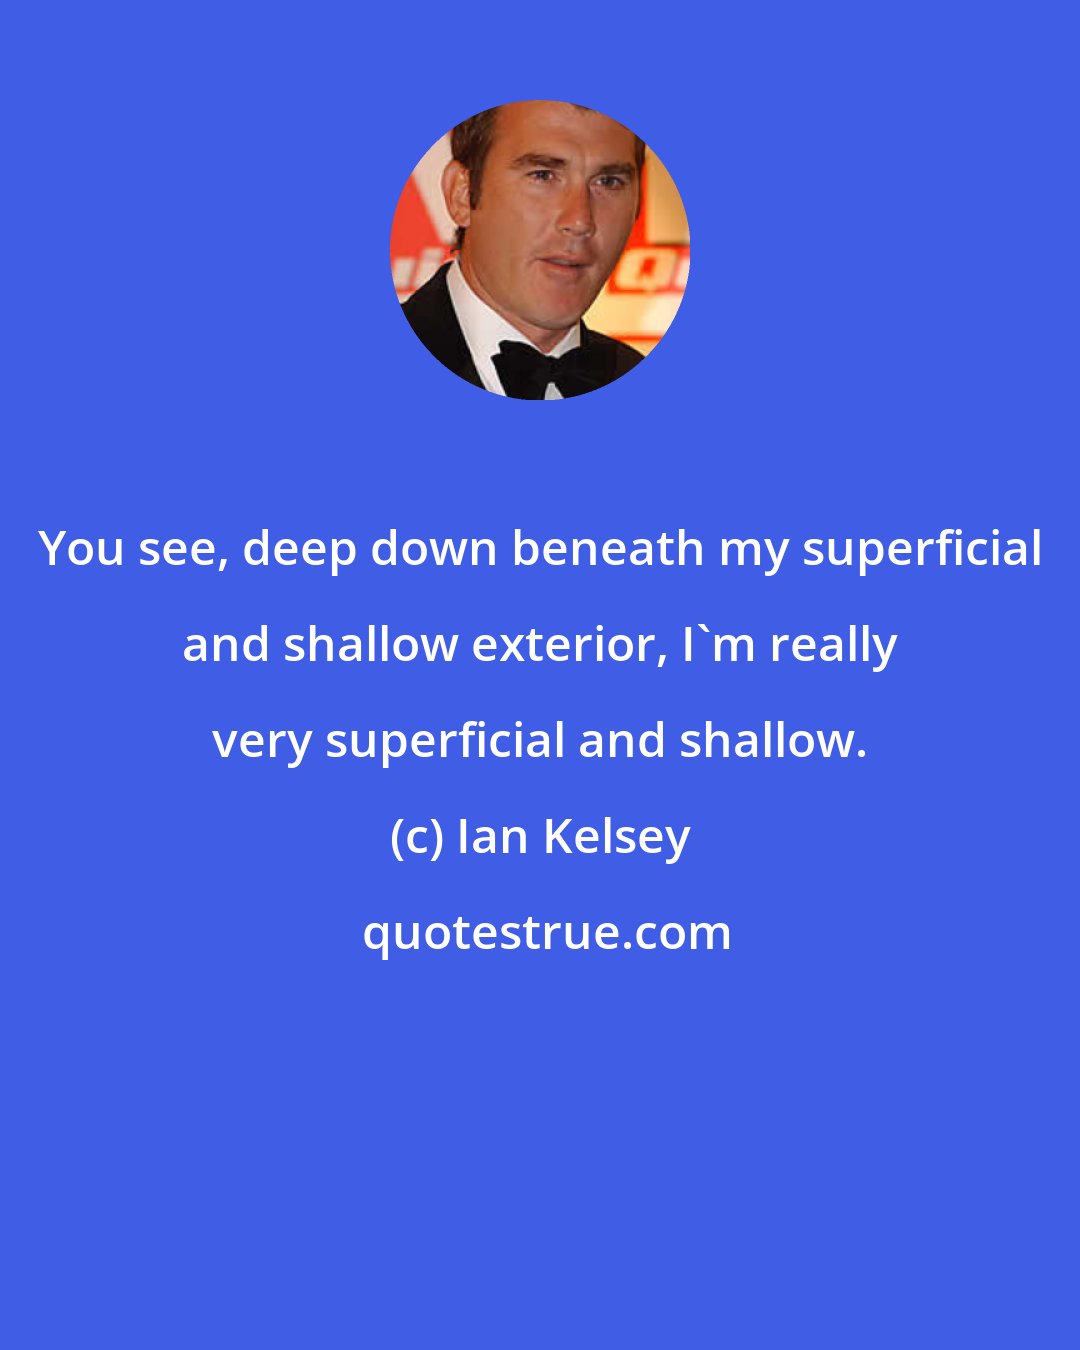 Ian Kelsey: You see, deep down beneath my superficial and shallow exterior, I'm really very superficial and shallow.